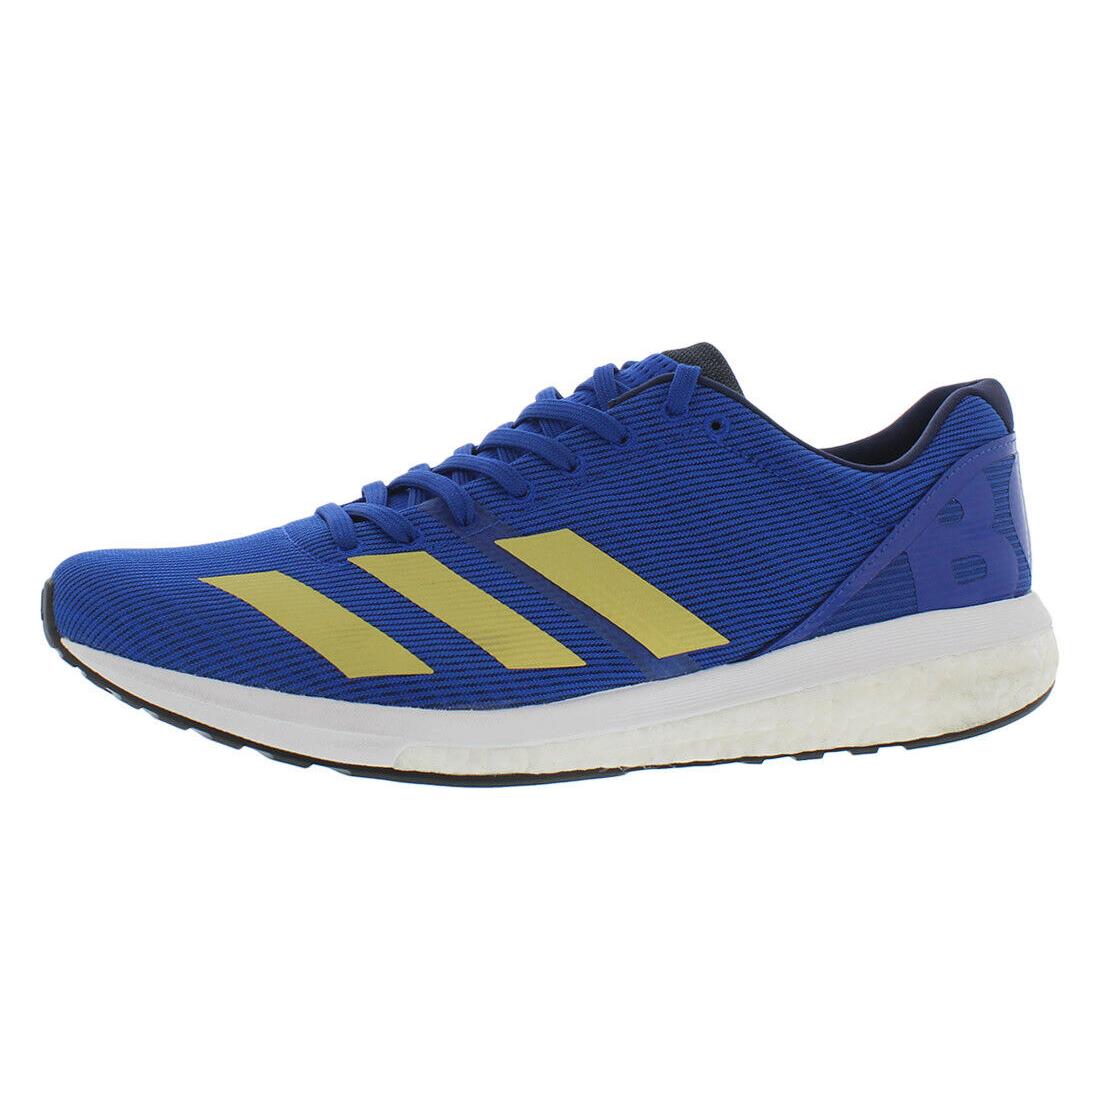 Adidas Ultraboost Mens Shoes Size 11.5 Color: Blue/gold - Blue/Gold, Main: Blue